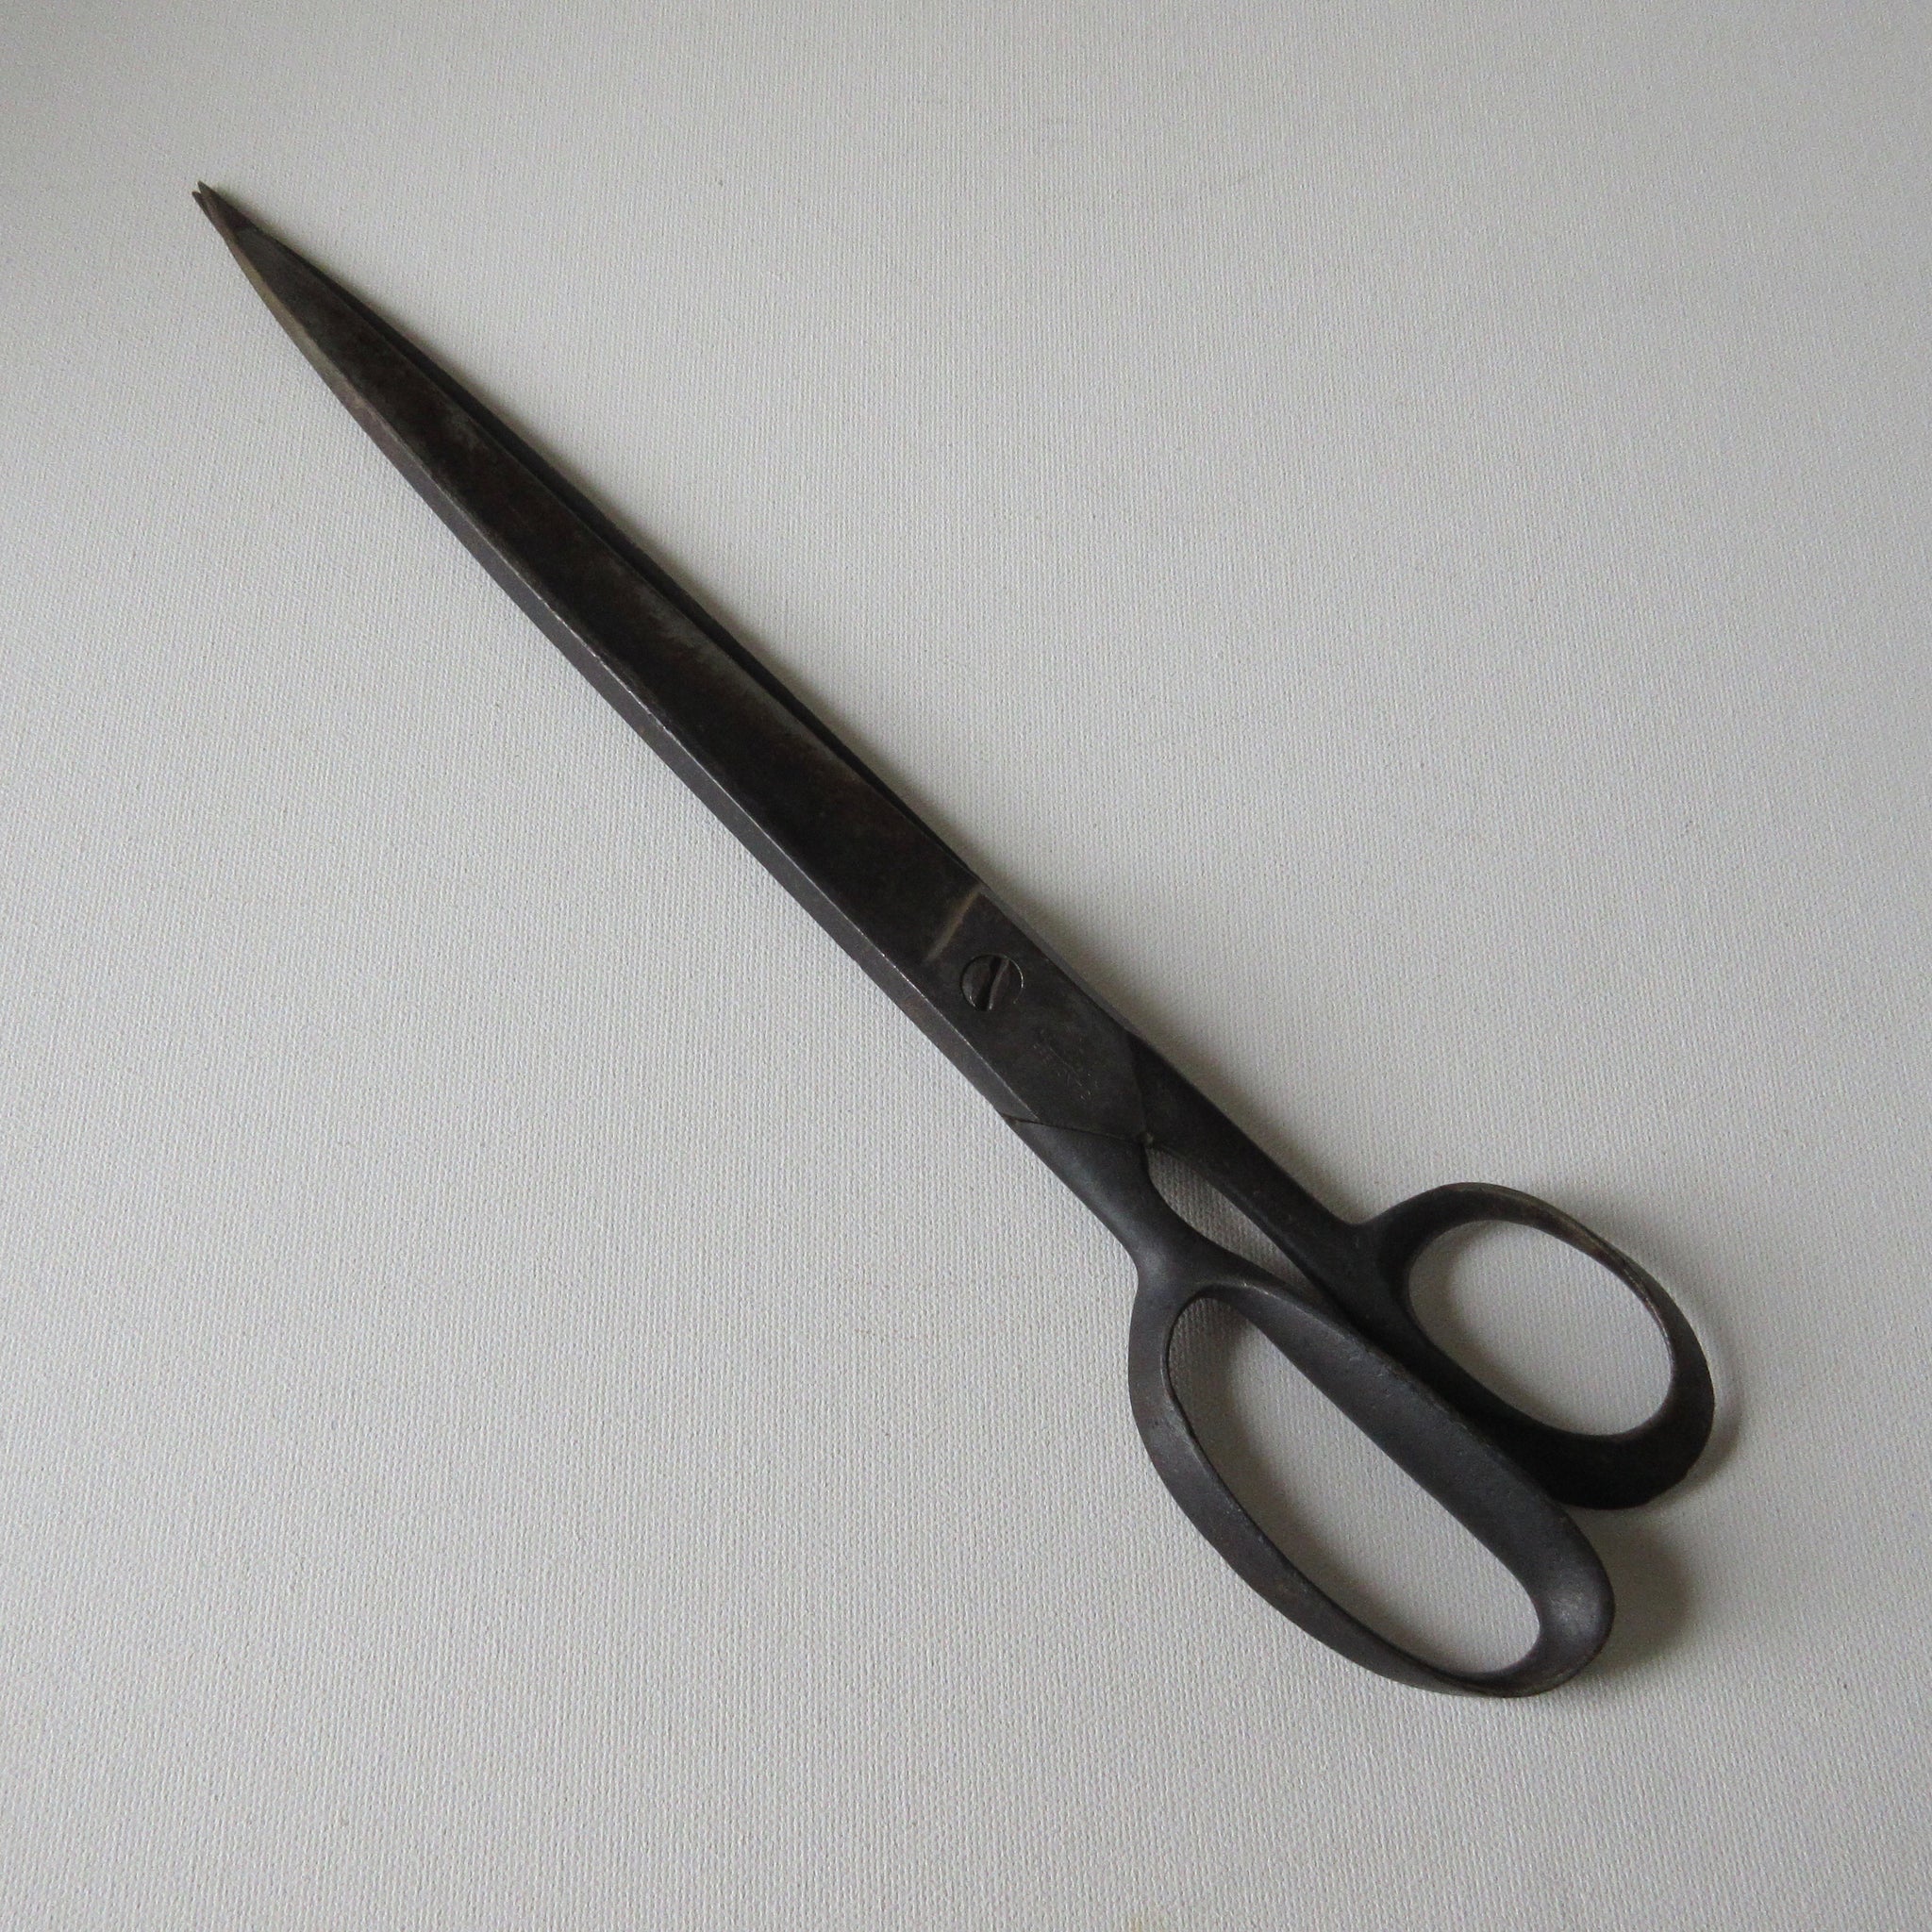 Huge Vintage Scissors or Shears, Goodrich BY Clauss, USA, Aged